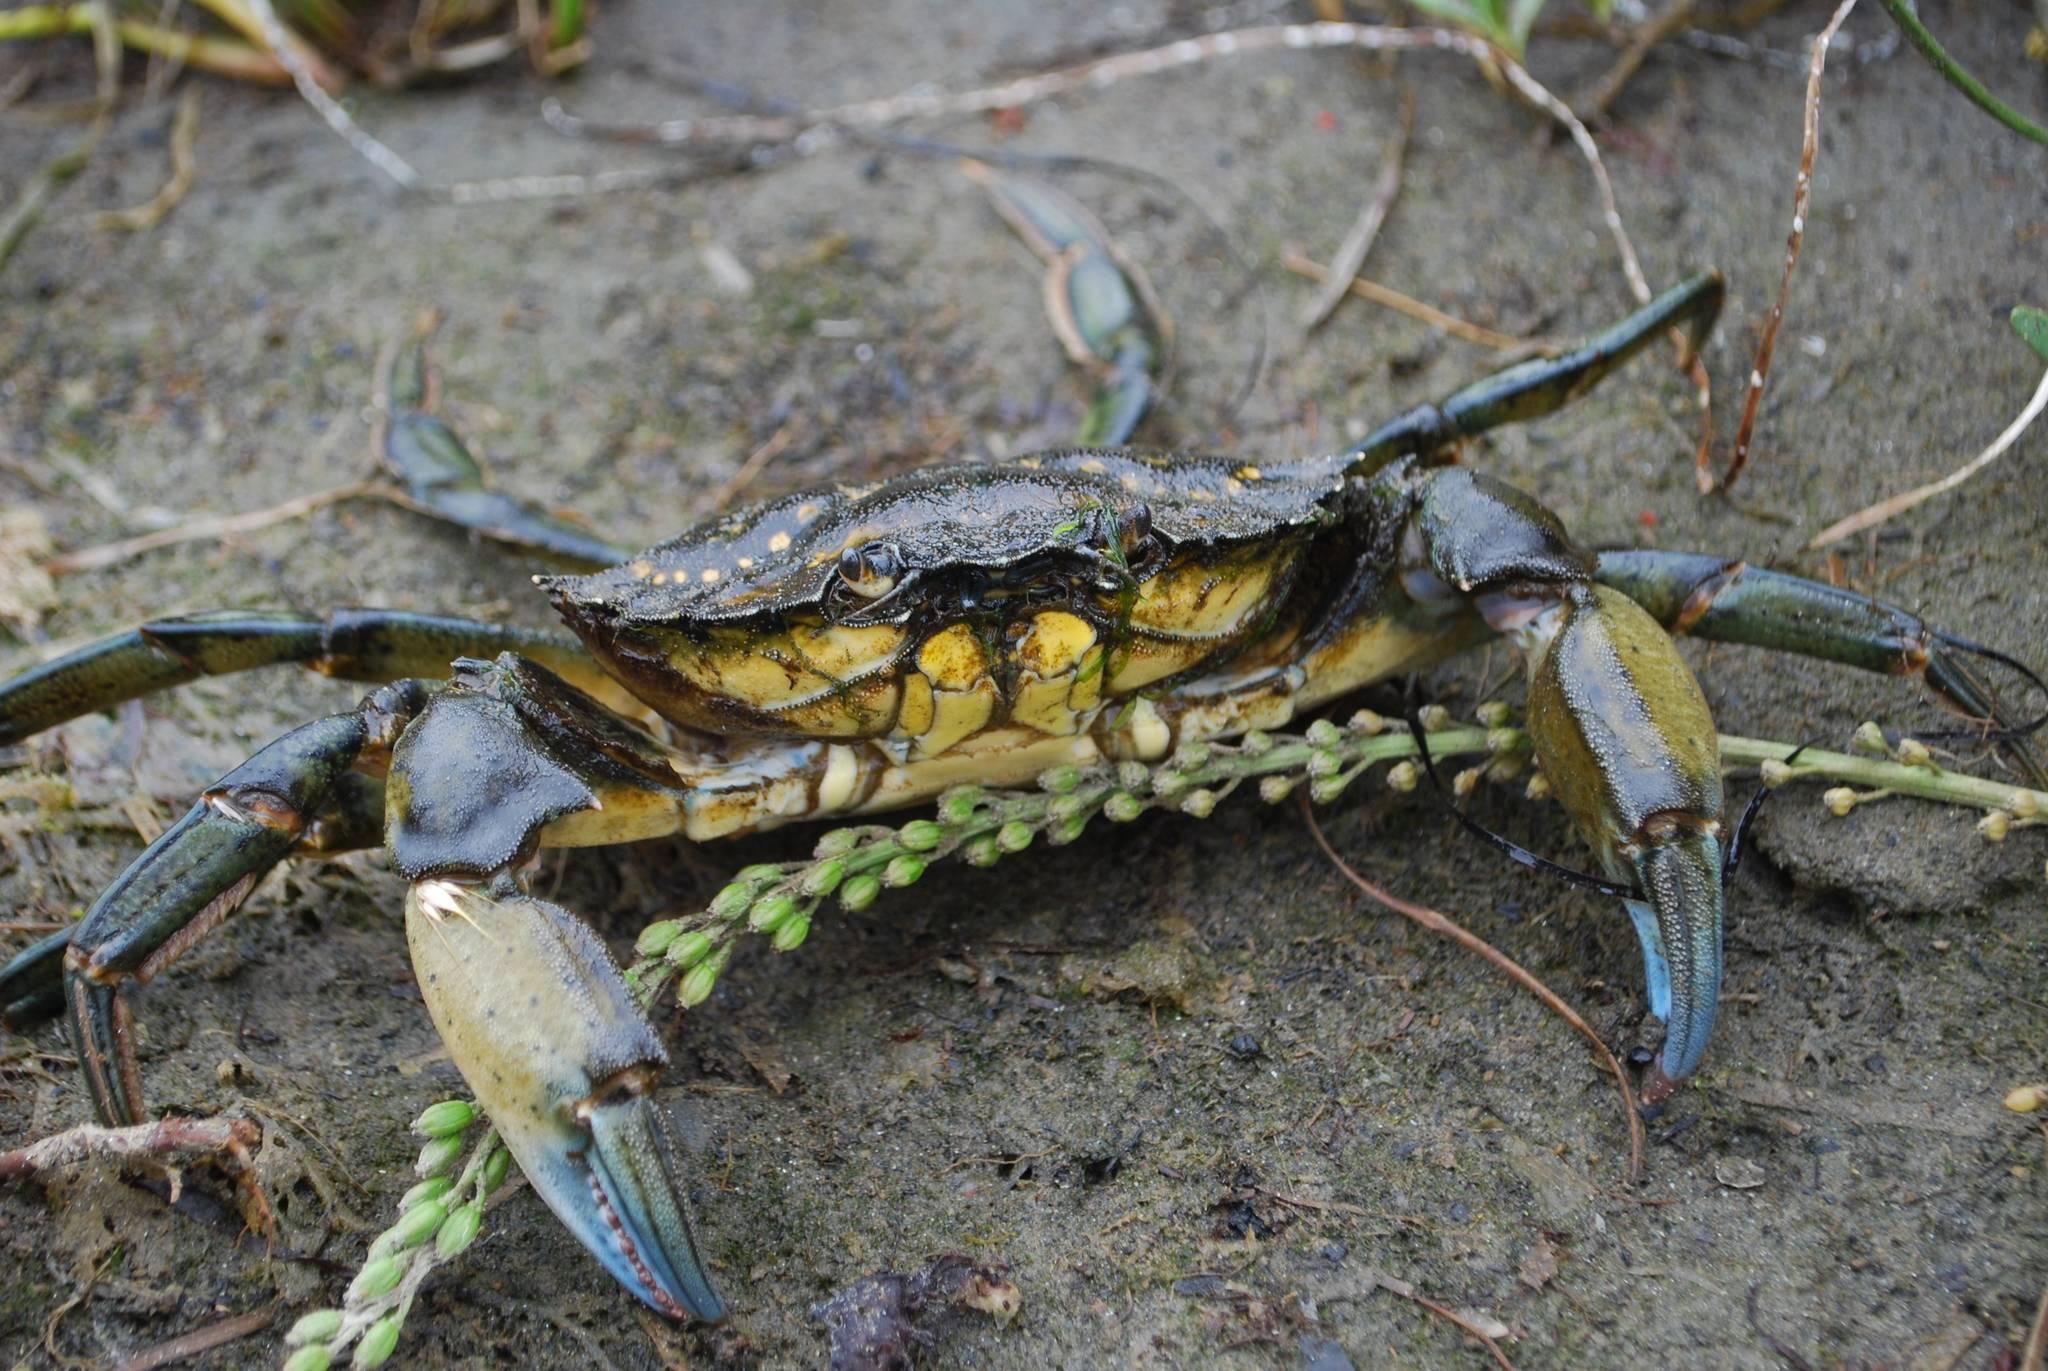 SeaDoc Society awards Salish Sea Science Prize to crab team For early detection and prevention of invasive European Green Crab